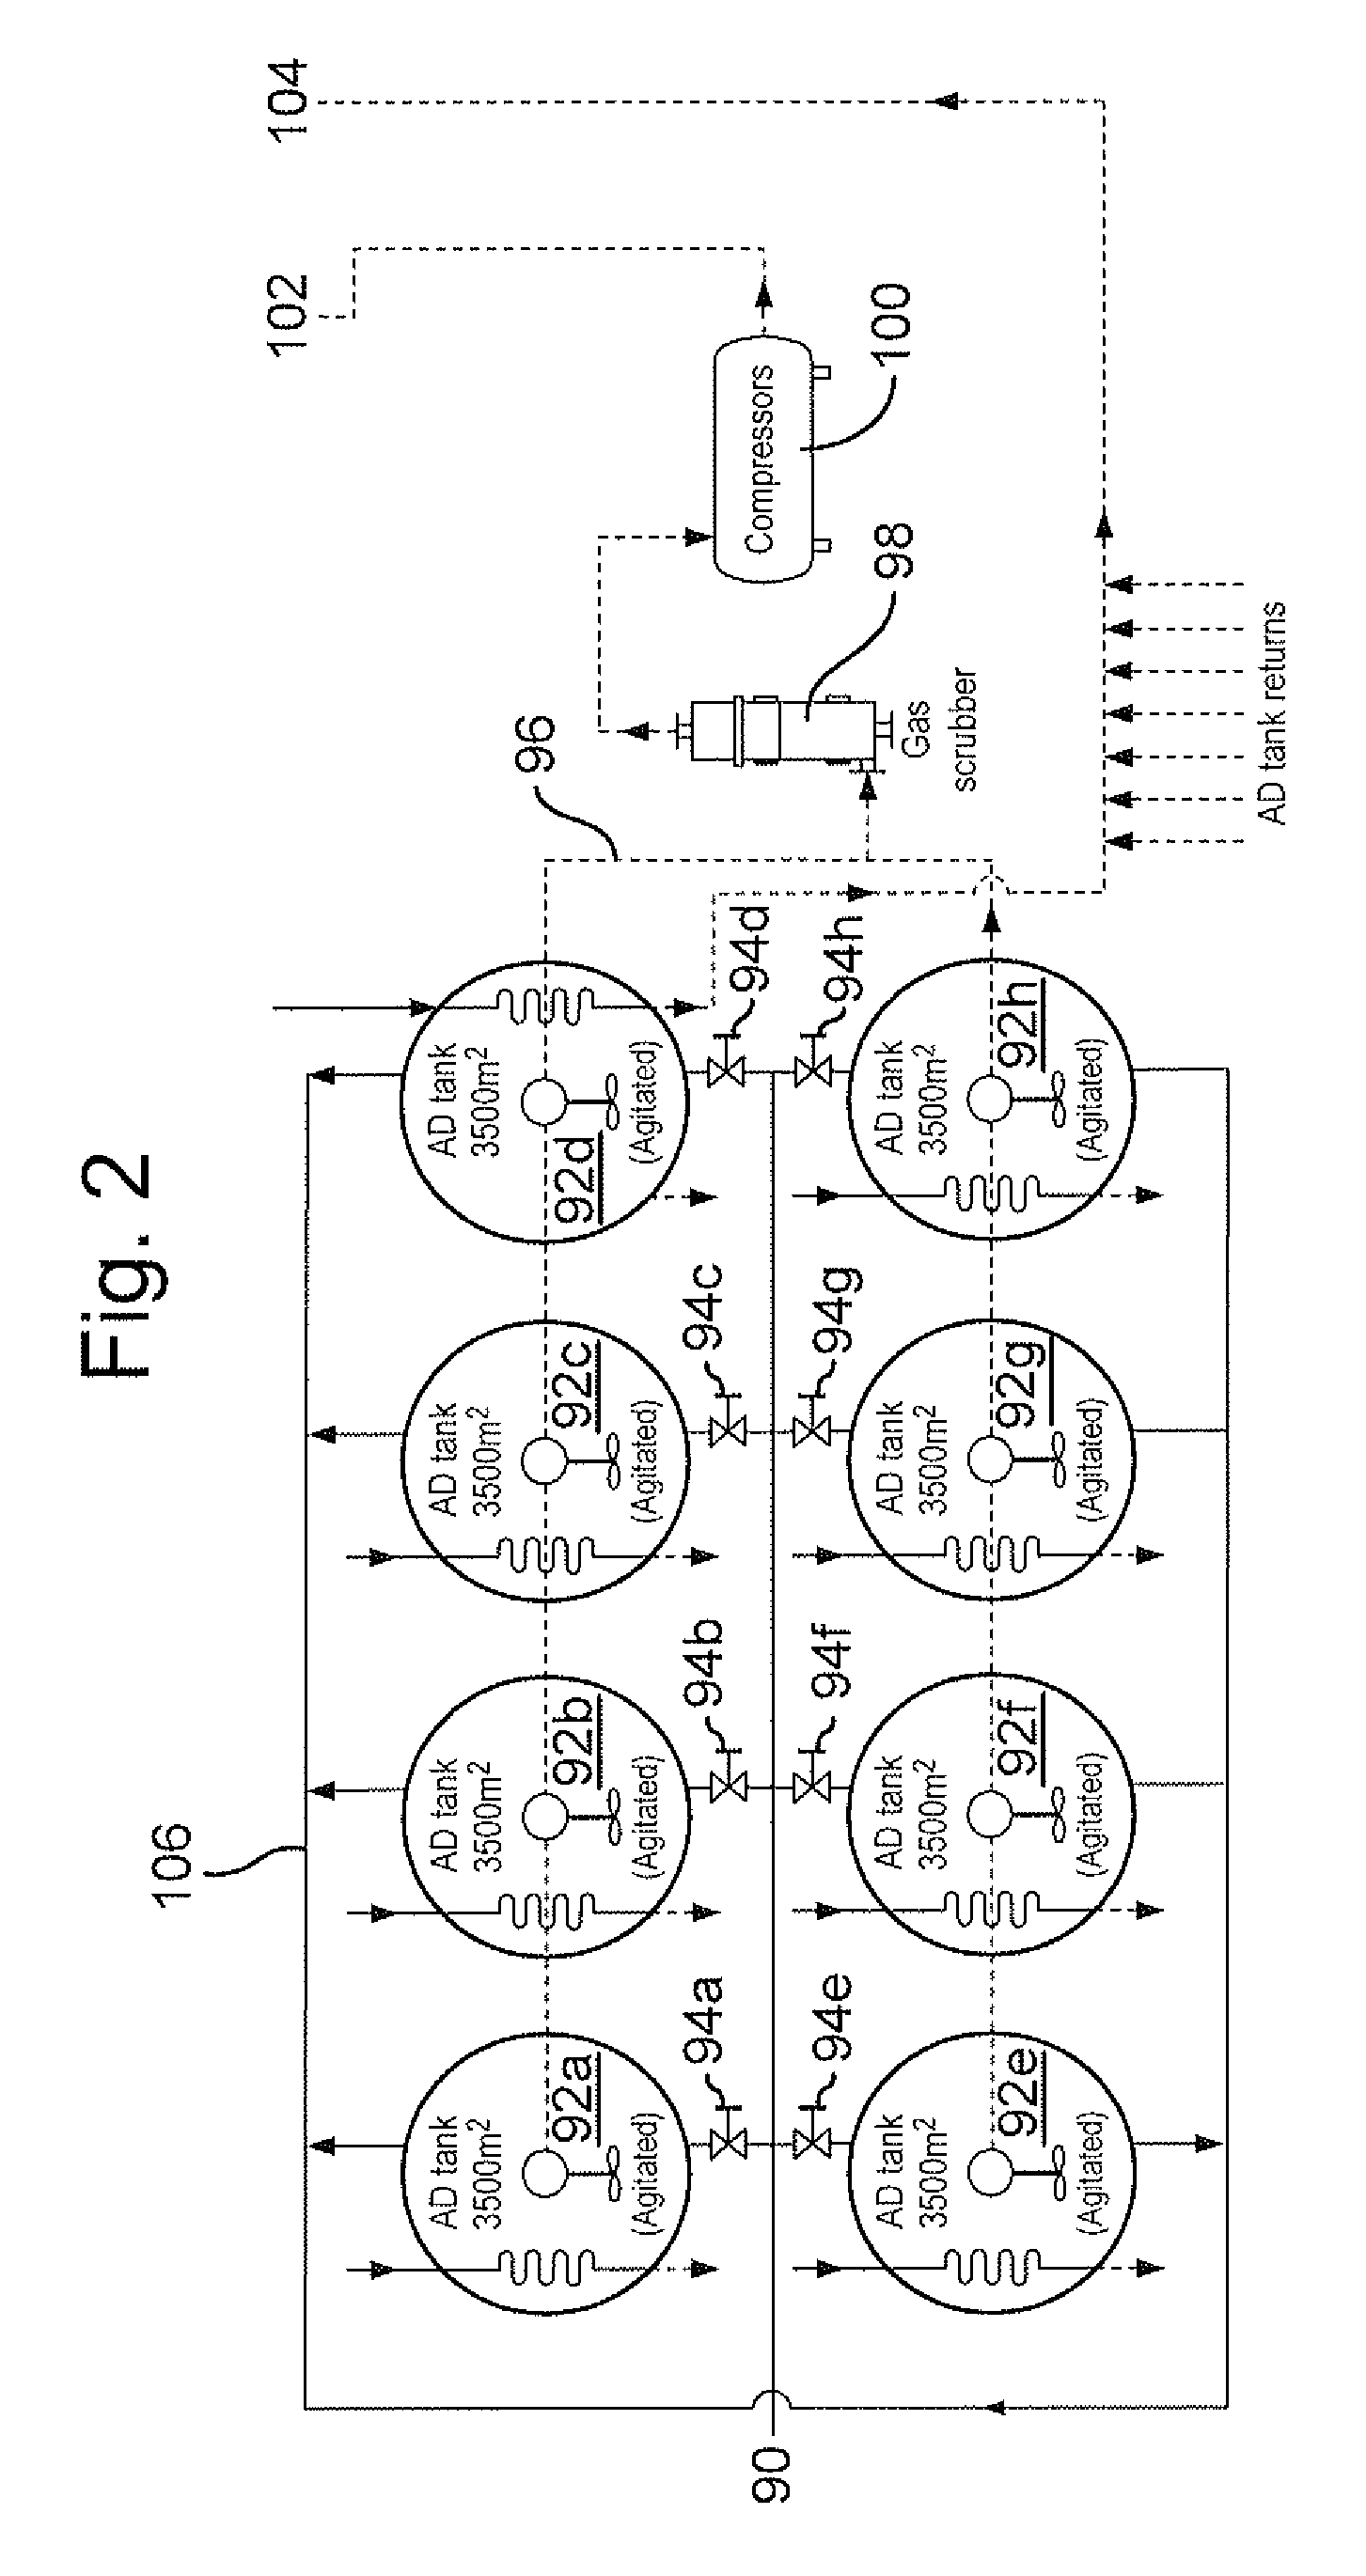 Apparatus and process for treating waste